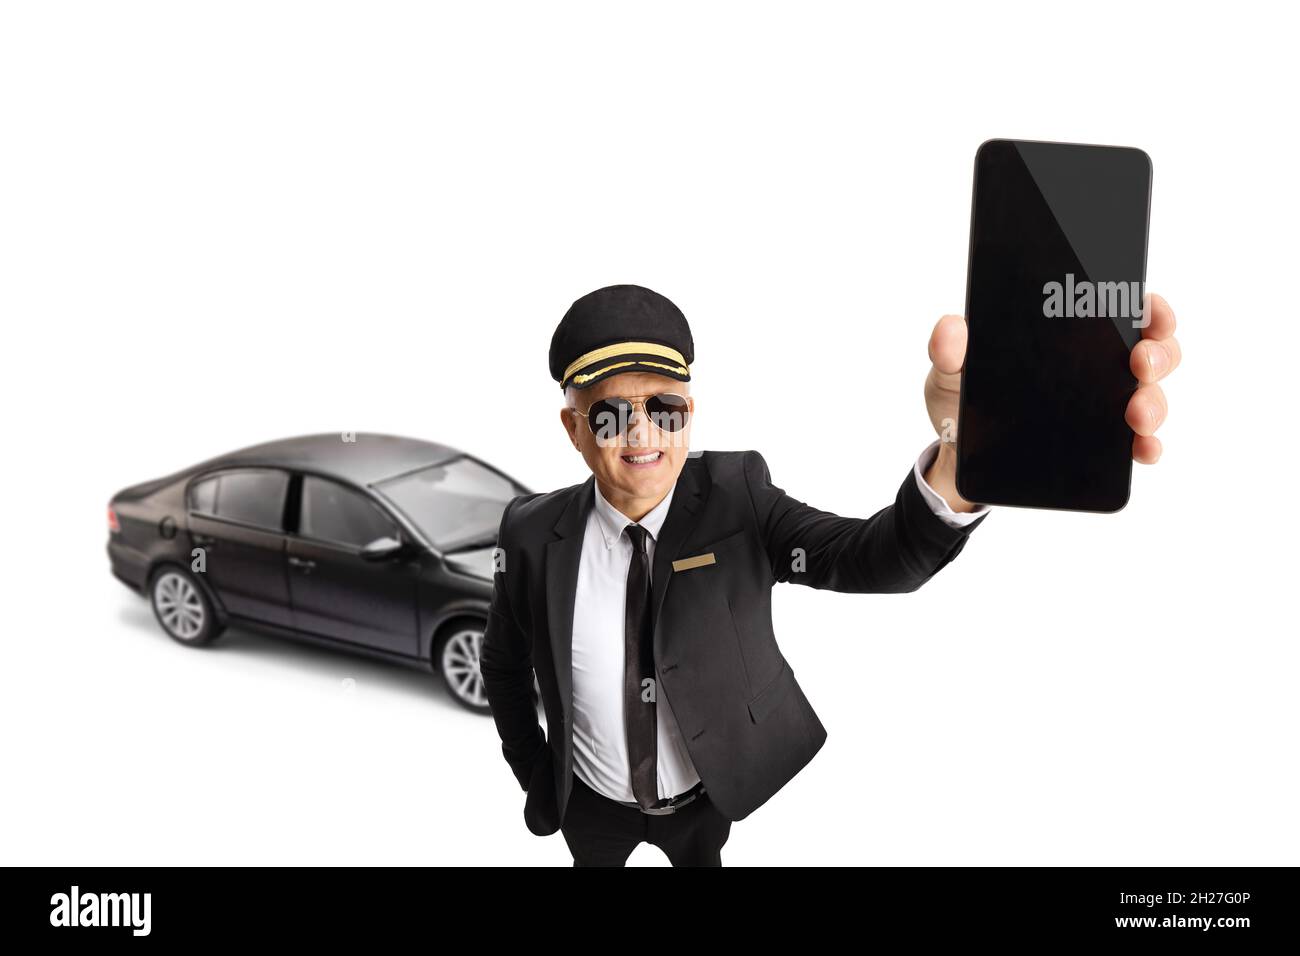 Mature chauffeur in a uniform holding a smartphone in front of a black car isolated on white background Stock Photo